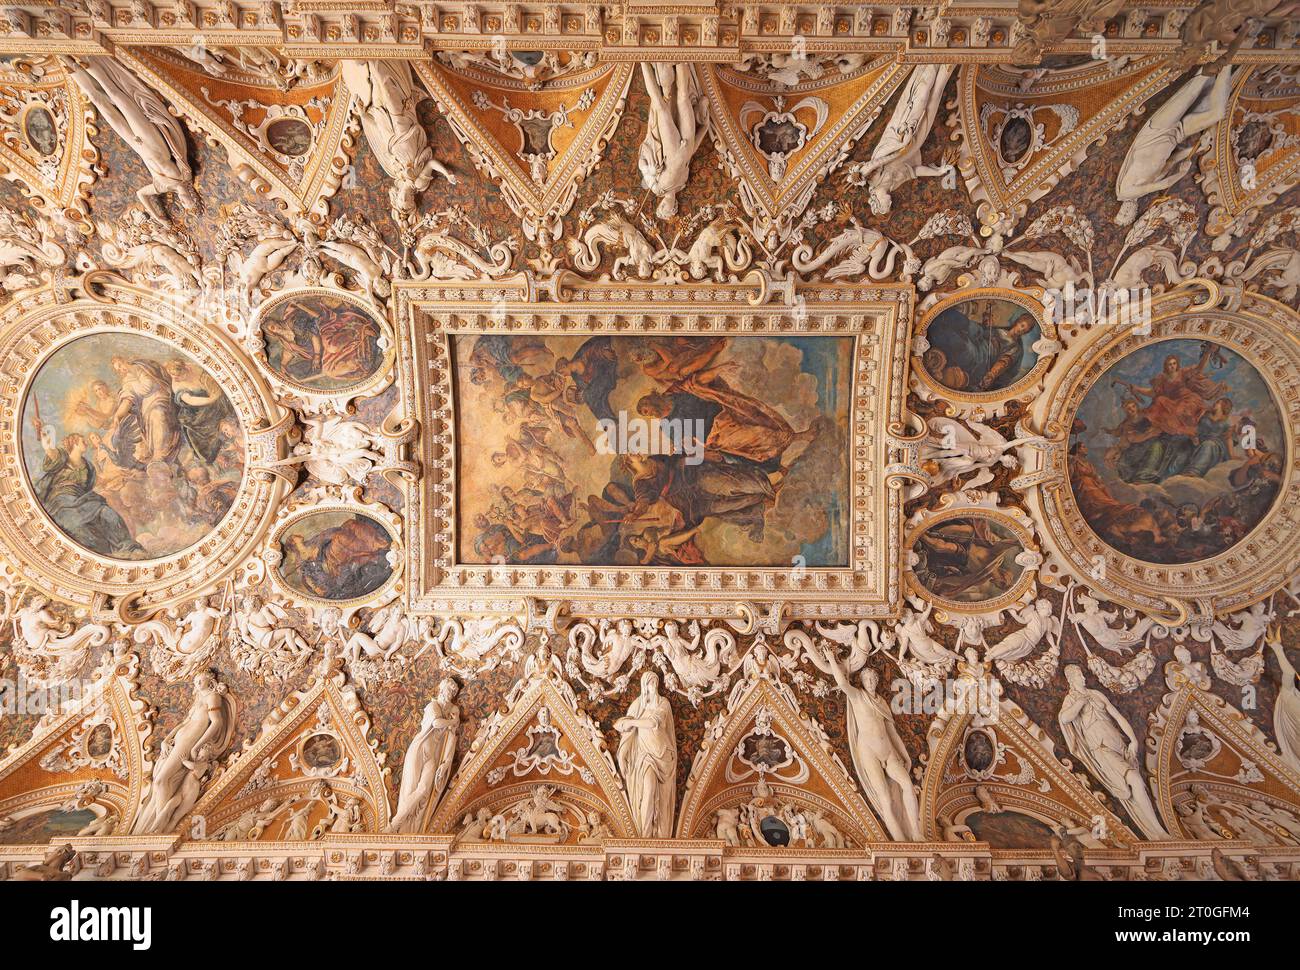 The Four Doors Room a magnificent and detailed coffered ceiling with intricate stucco work in Doge Palace, including painting of Tintoretto and Titian Stock Photo